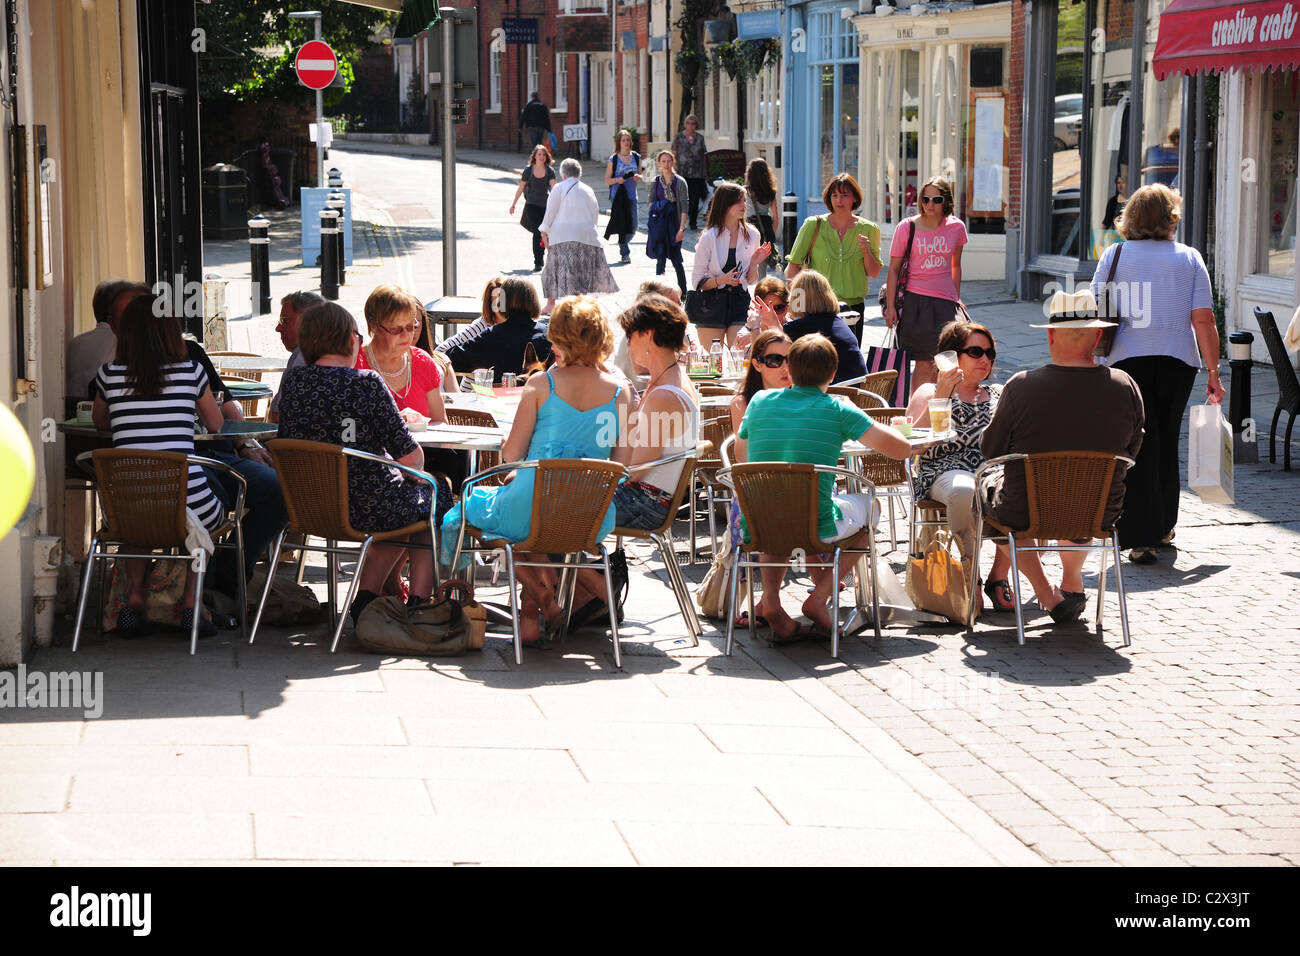 The hottest April in decades brings out the shoppers and the Al Fresco diners. Stock Photo